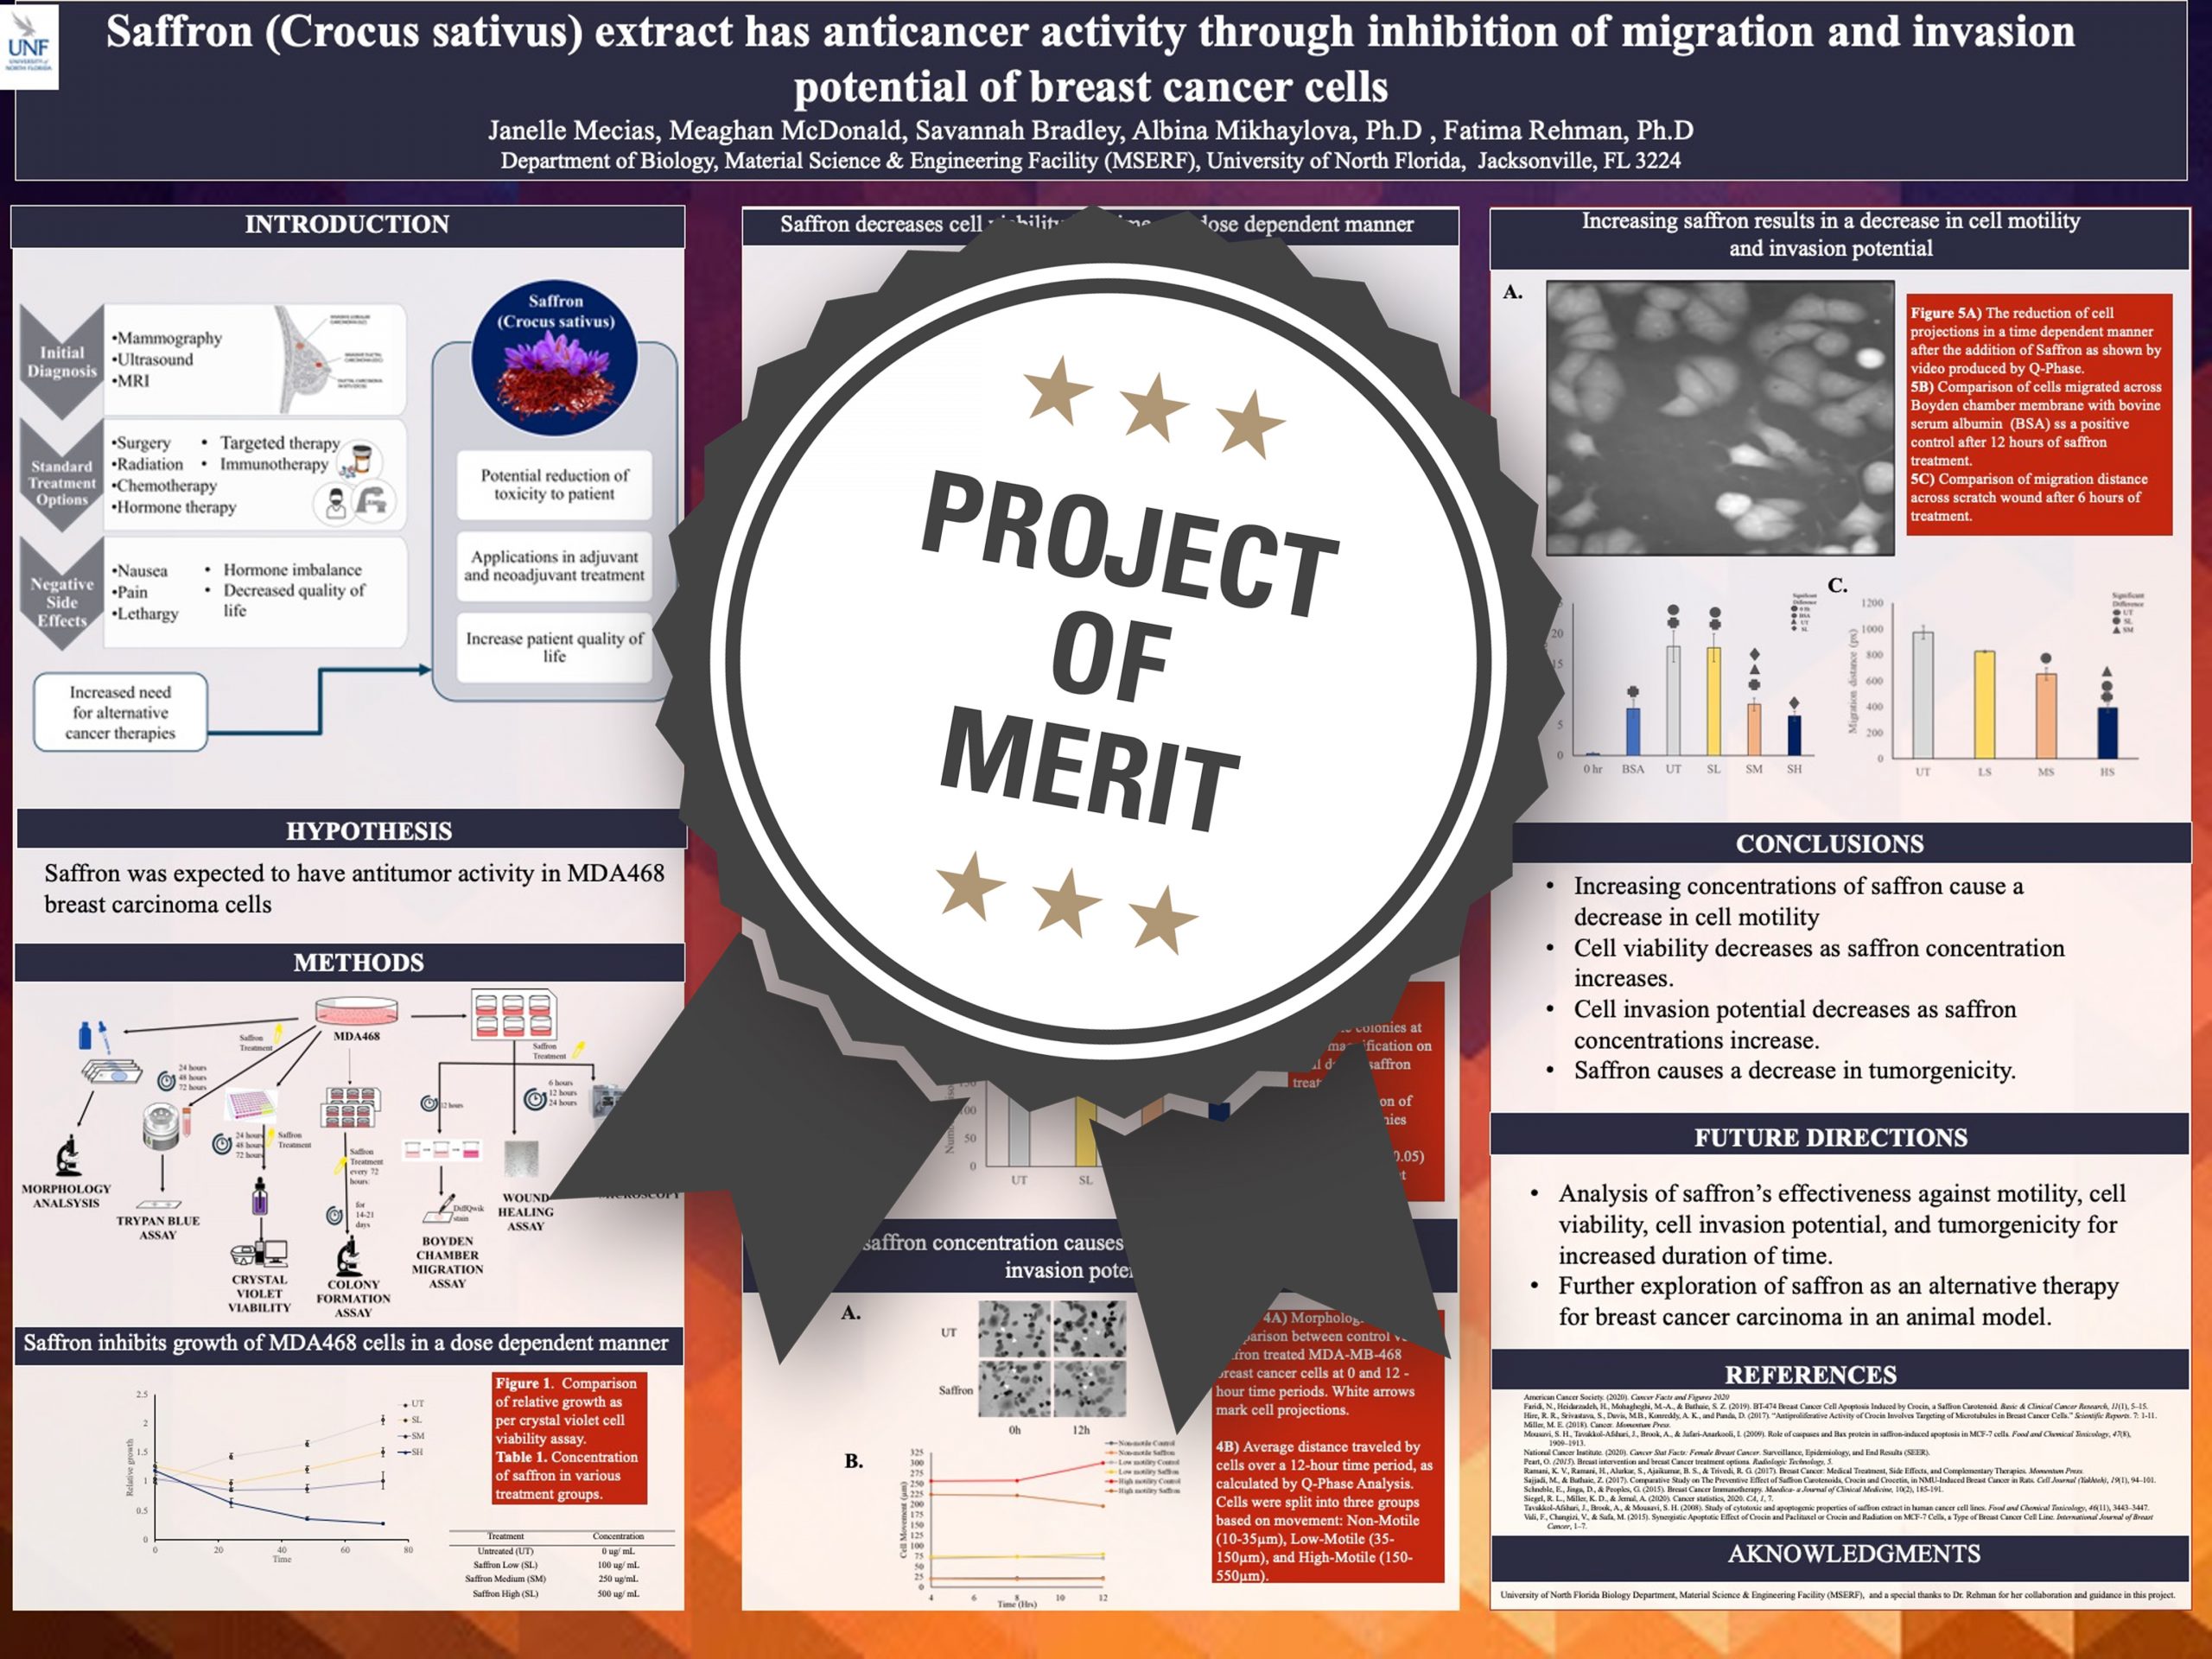 Saffron (Crocus sativus) extract has anticancer activity through inhibition of migration and invasion potential of breast cancer cells Project of Merit poster